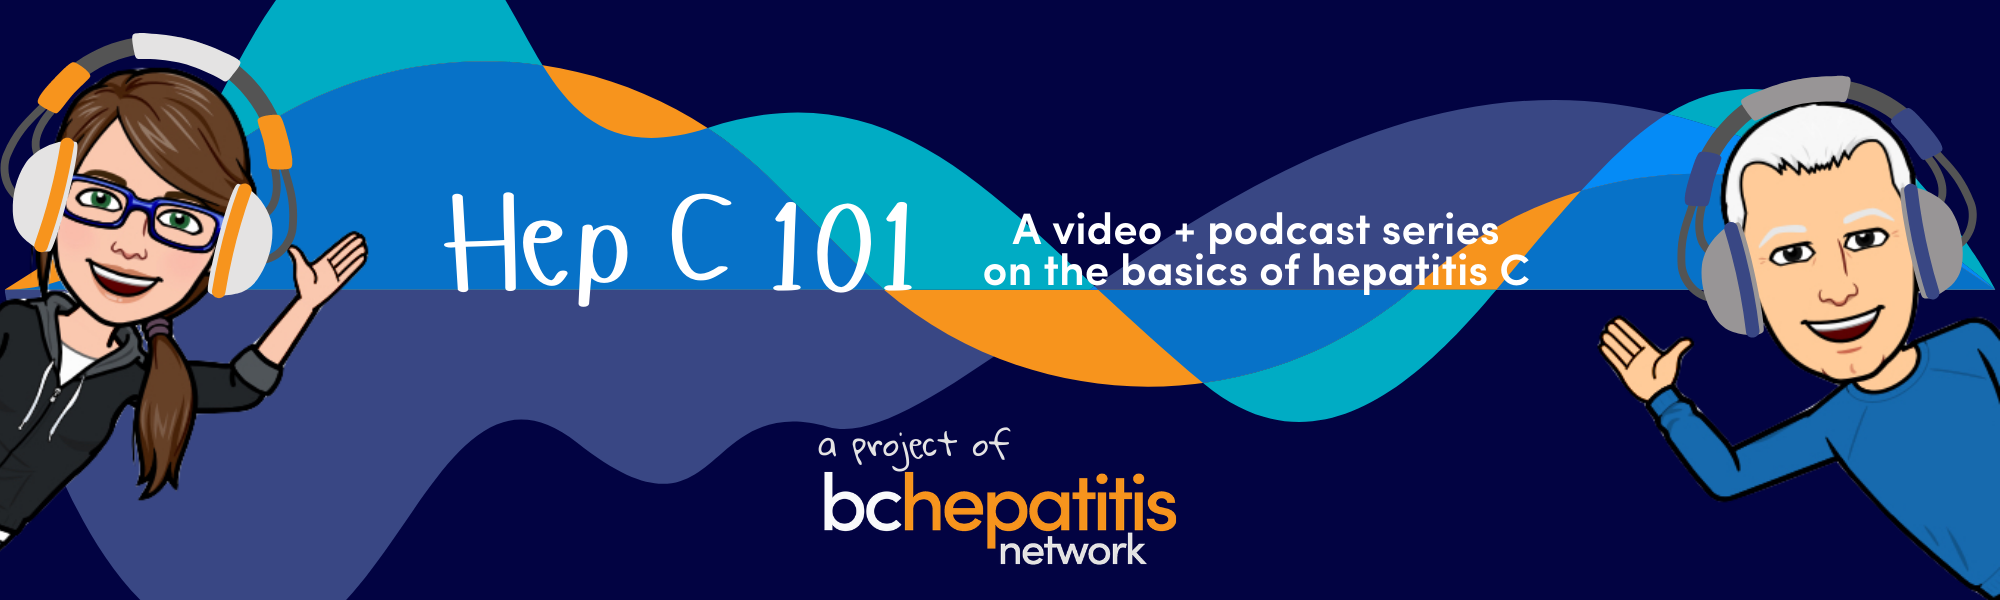 Header image: Hep C 101 - a podcast + video series on the basics of hepatitis c. A project of BC Hepatitis Network